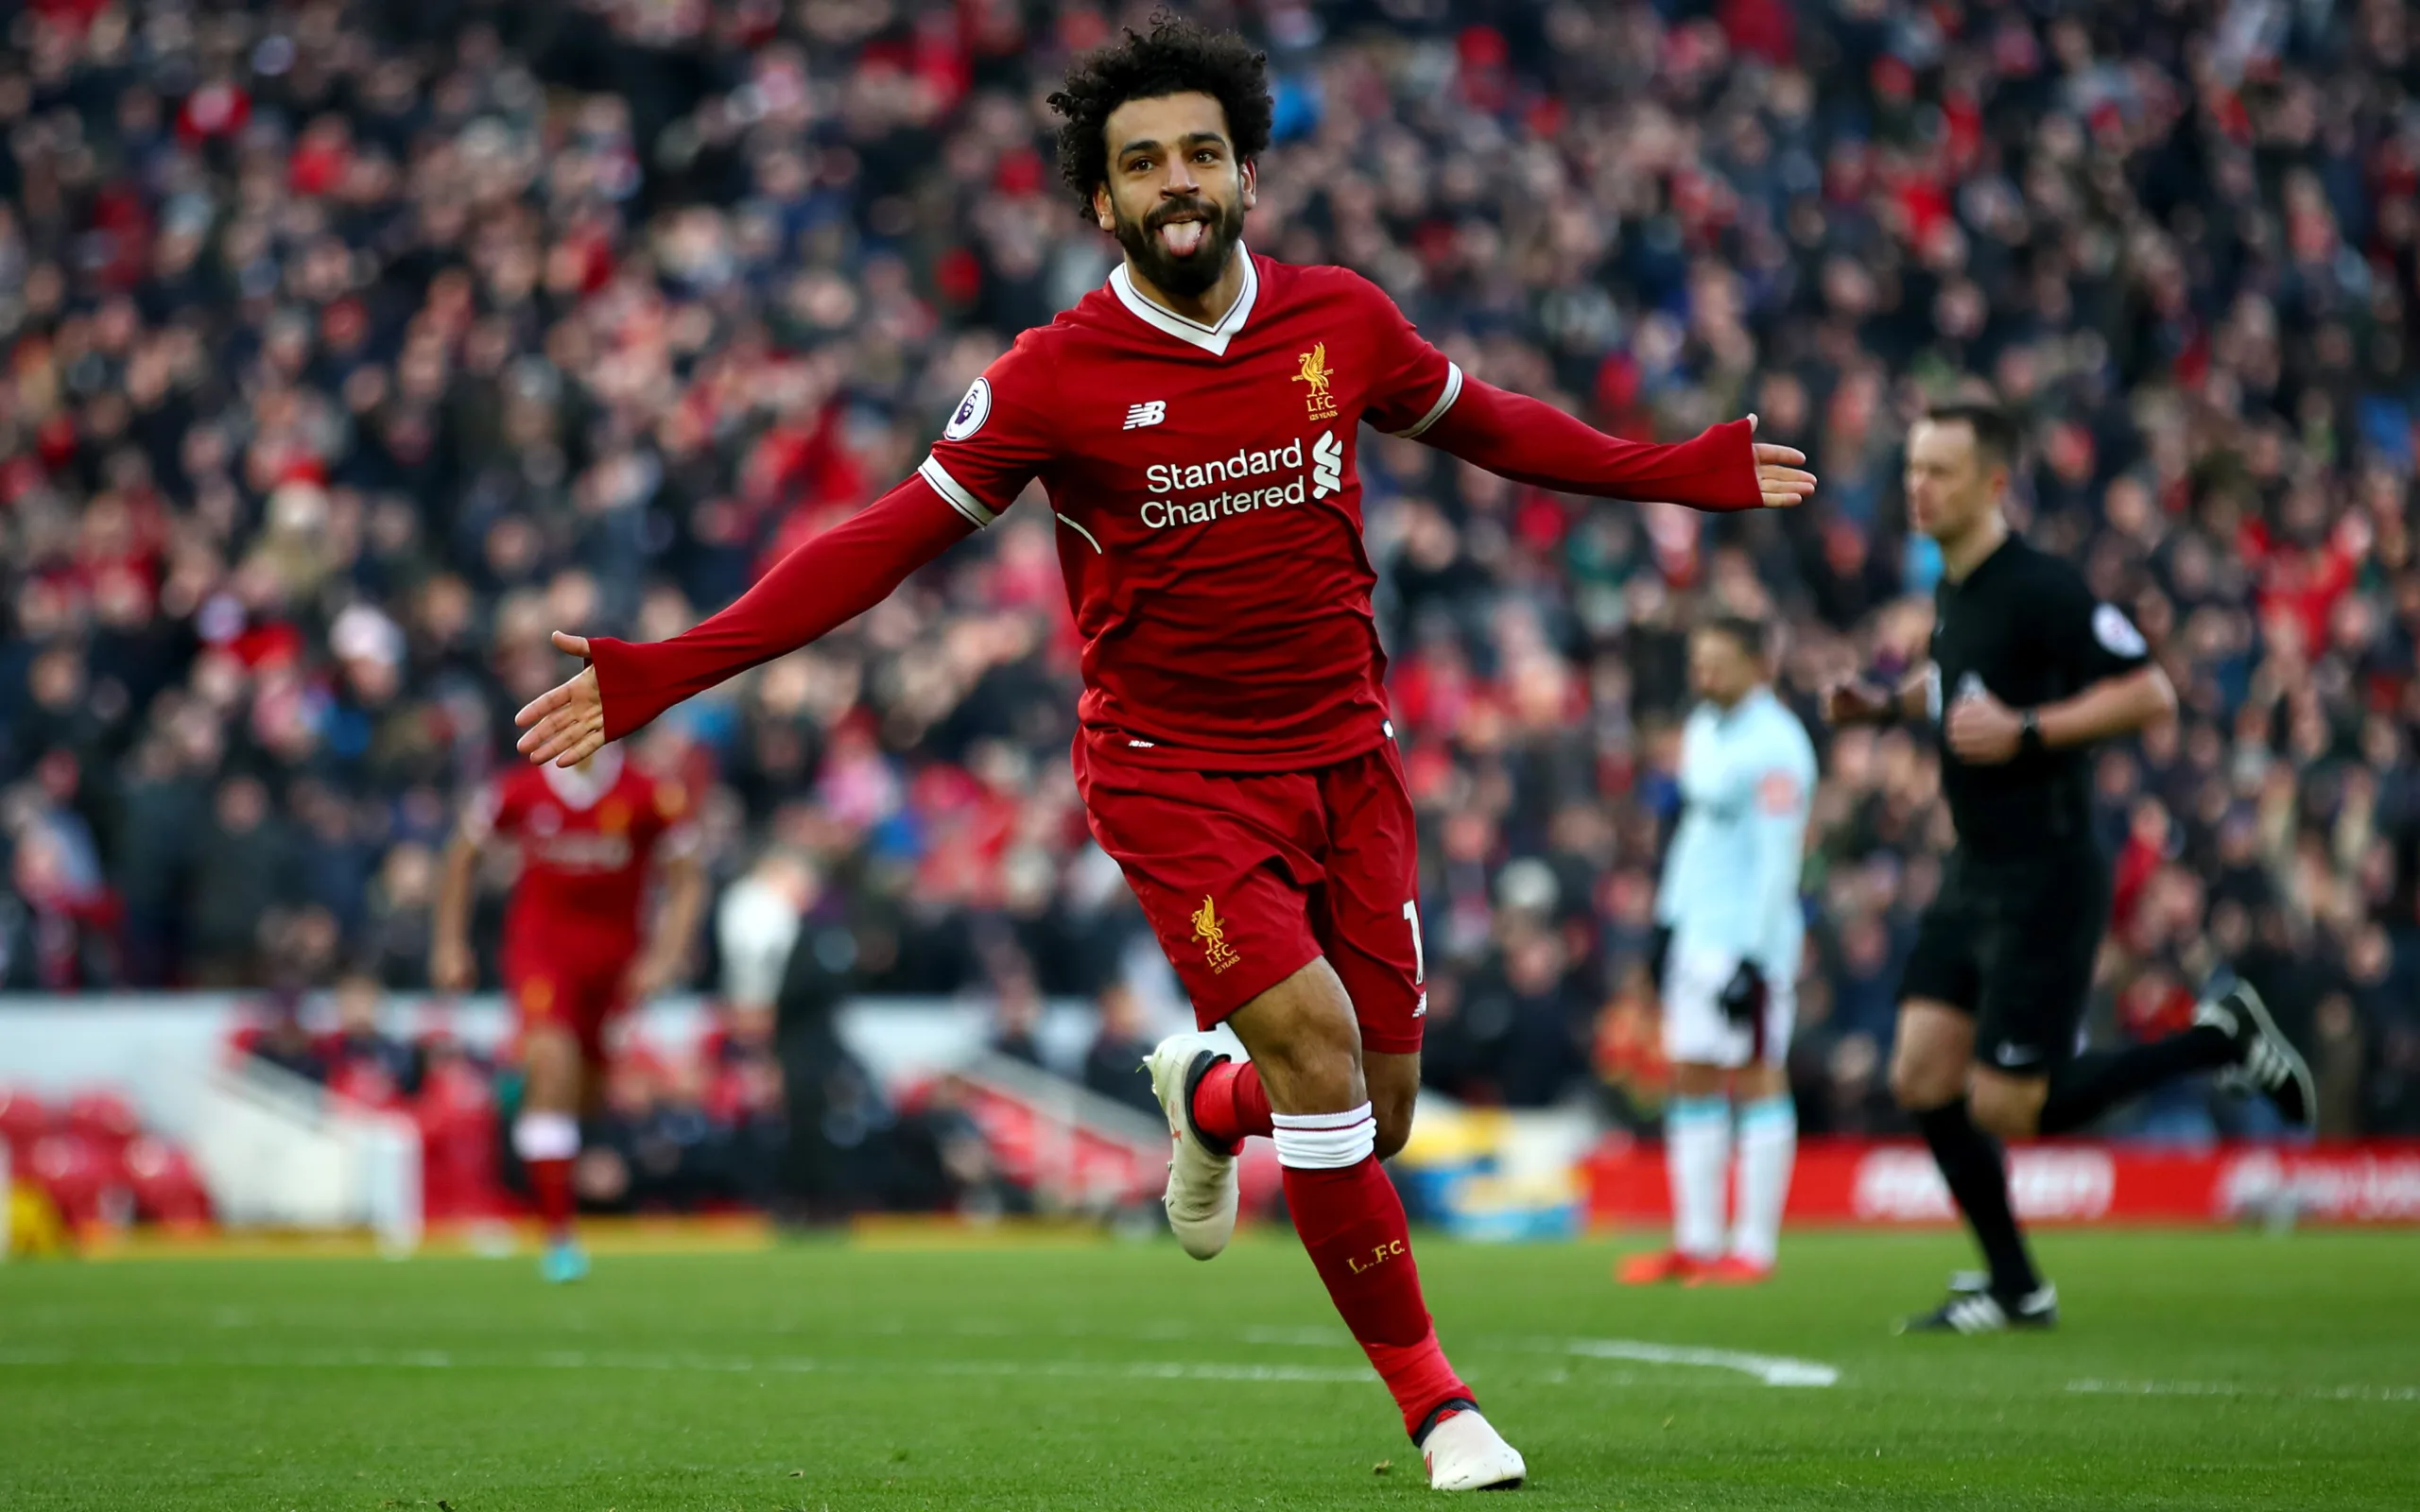 Liverpool win; the title bid continues after Salah's misfire